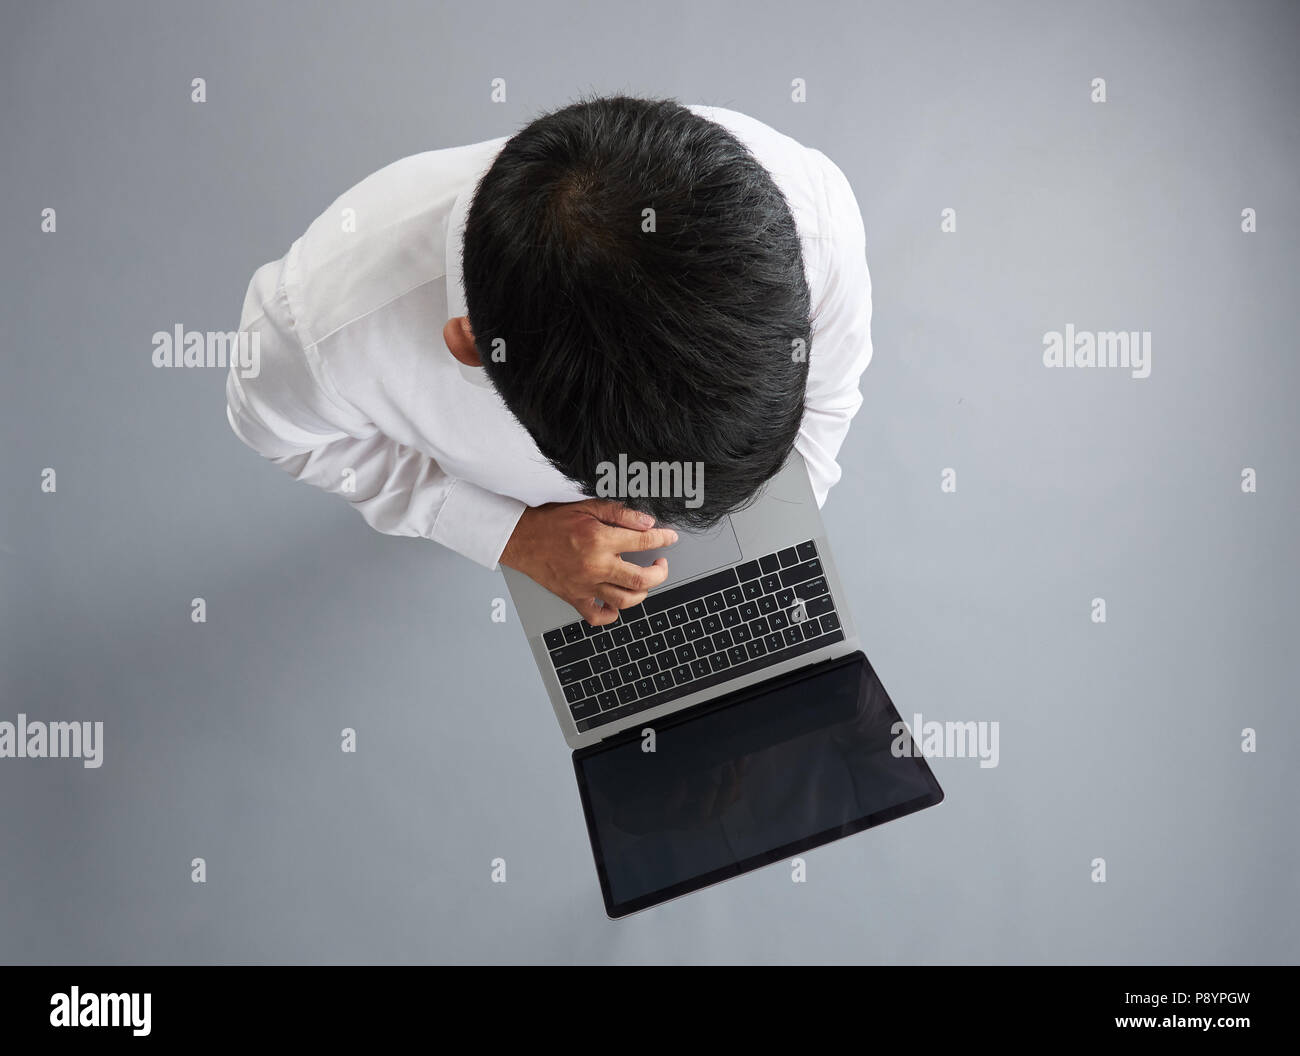 Man using laptop isolated on gray background above top view Stock Photo